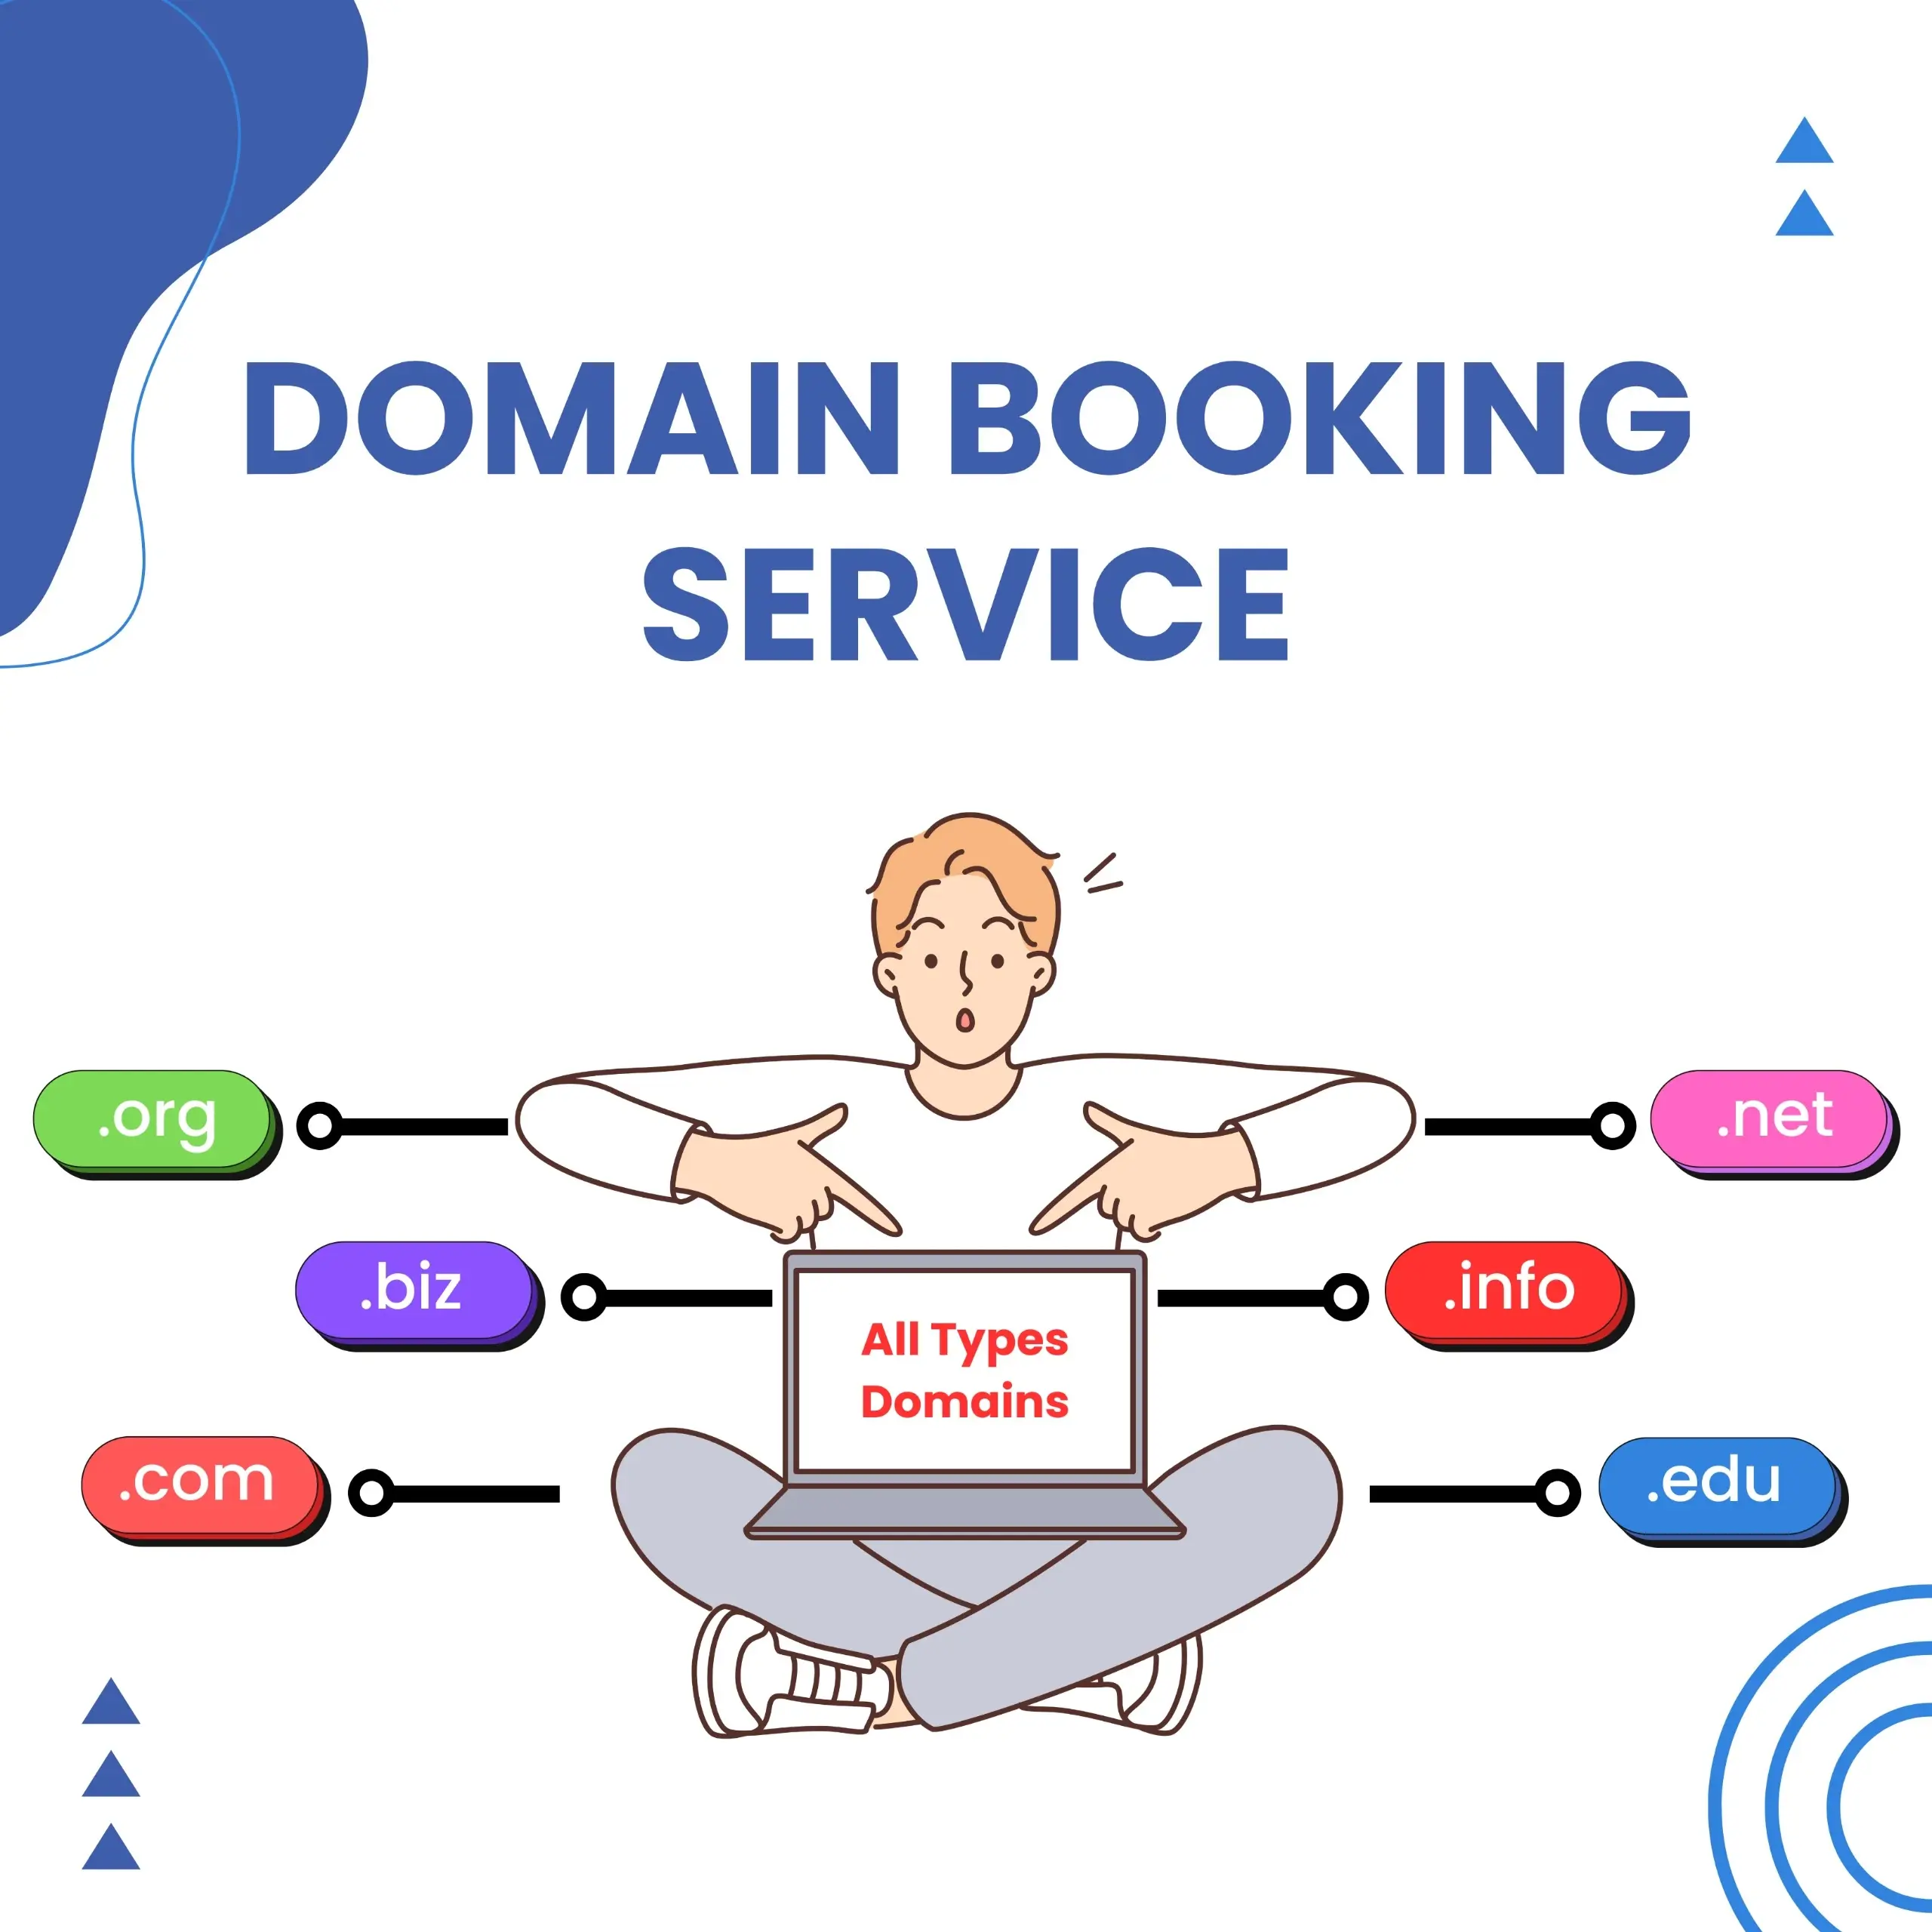 Domain Booking Services | Register Your Domain Name Today